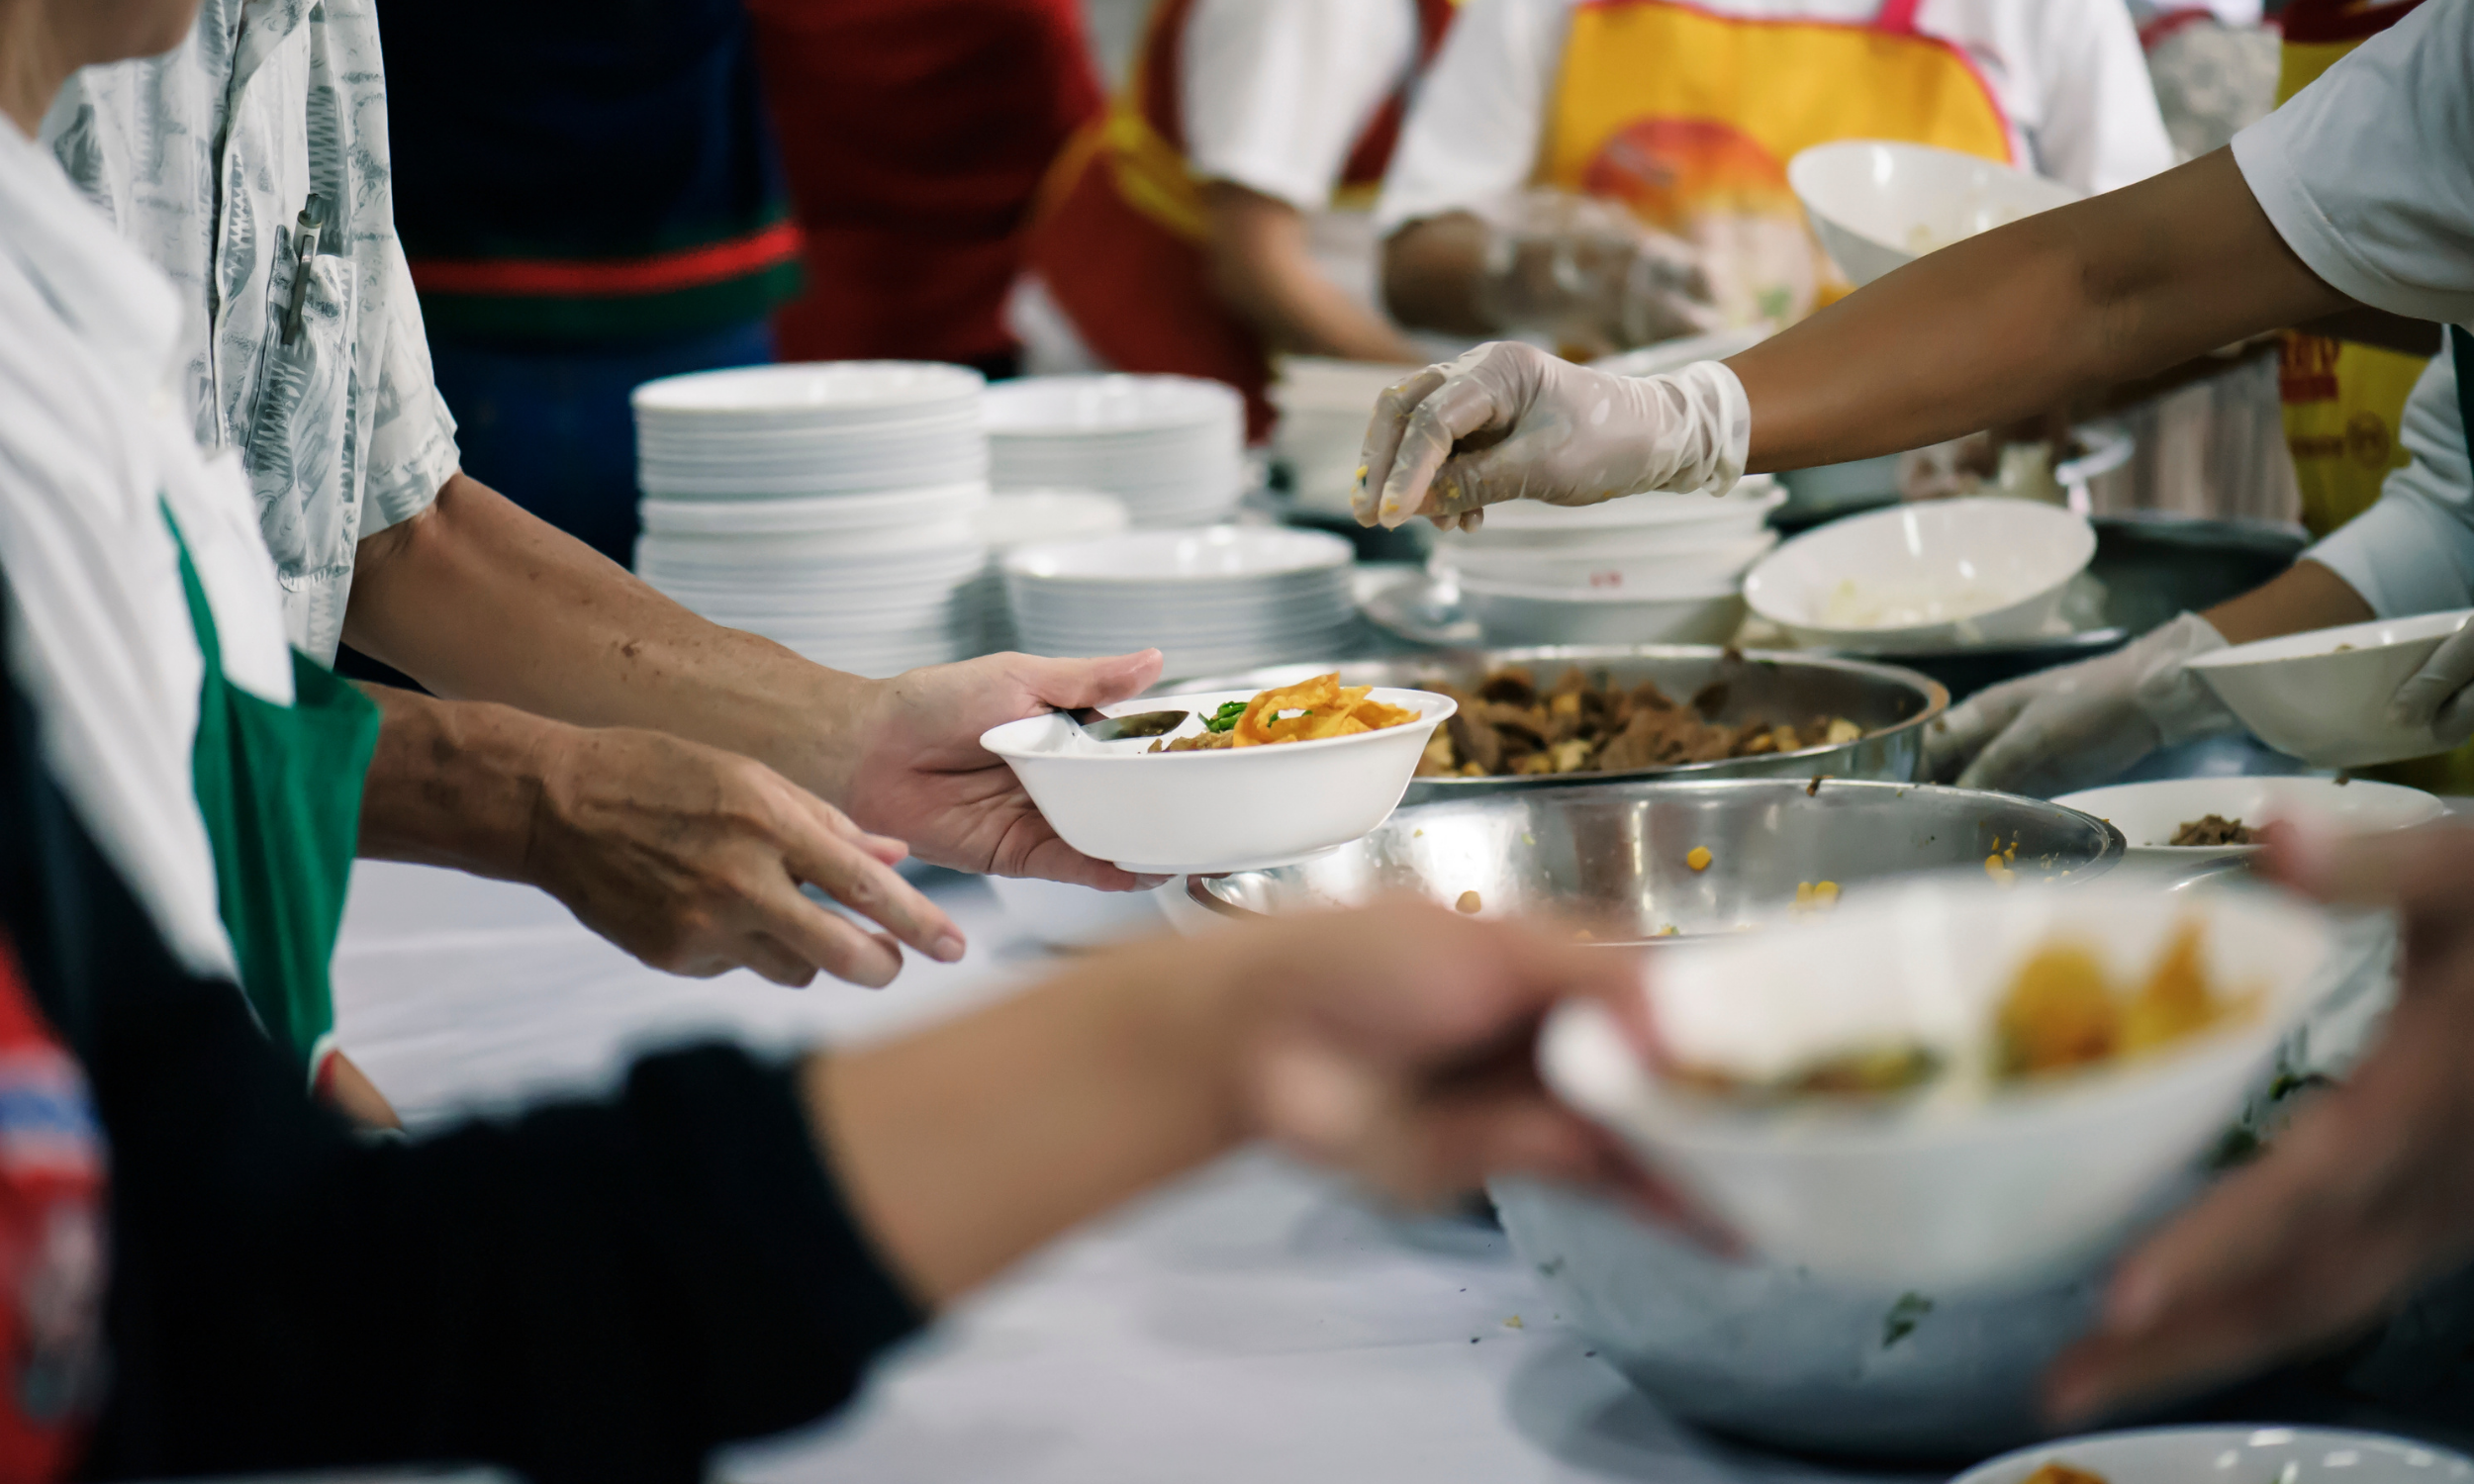 Hands serving food at a table